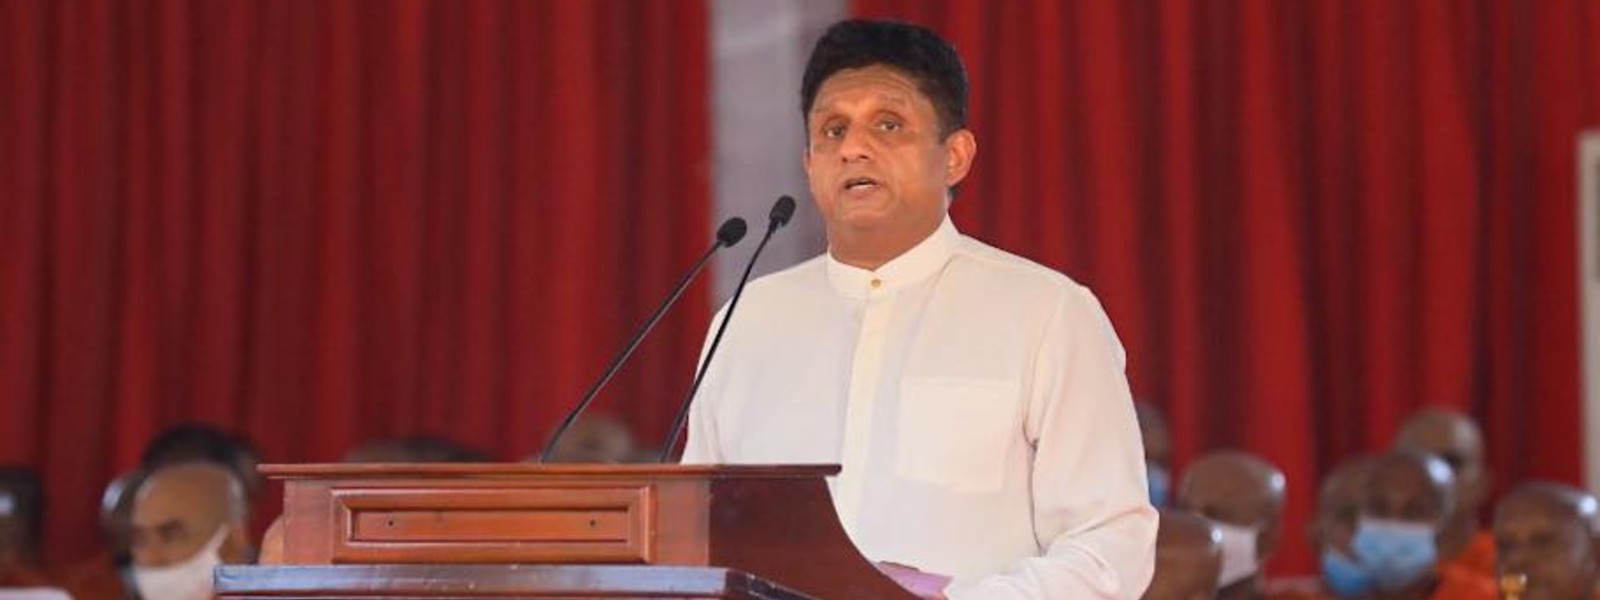 ‘You have lost face before the People- Step Down!’ – Sajith tells govt.